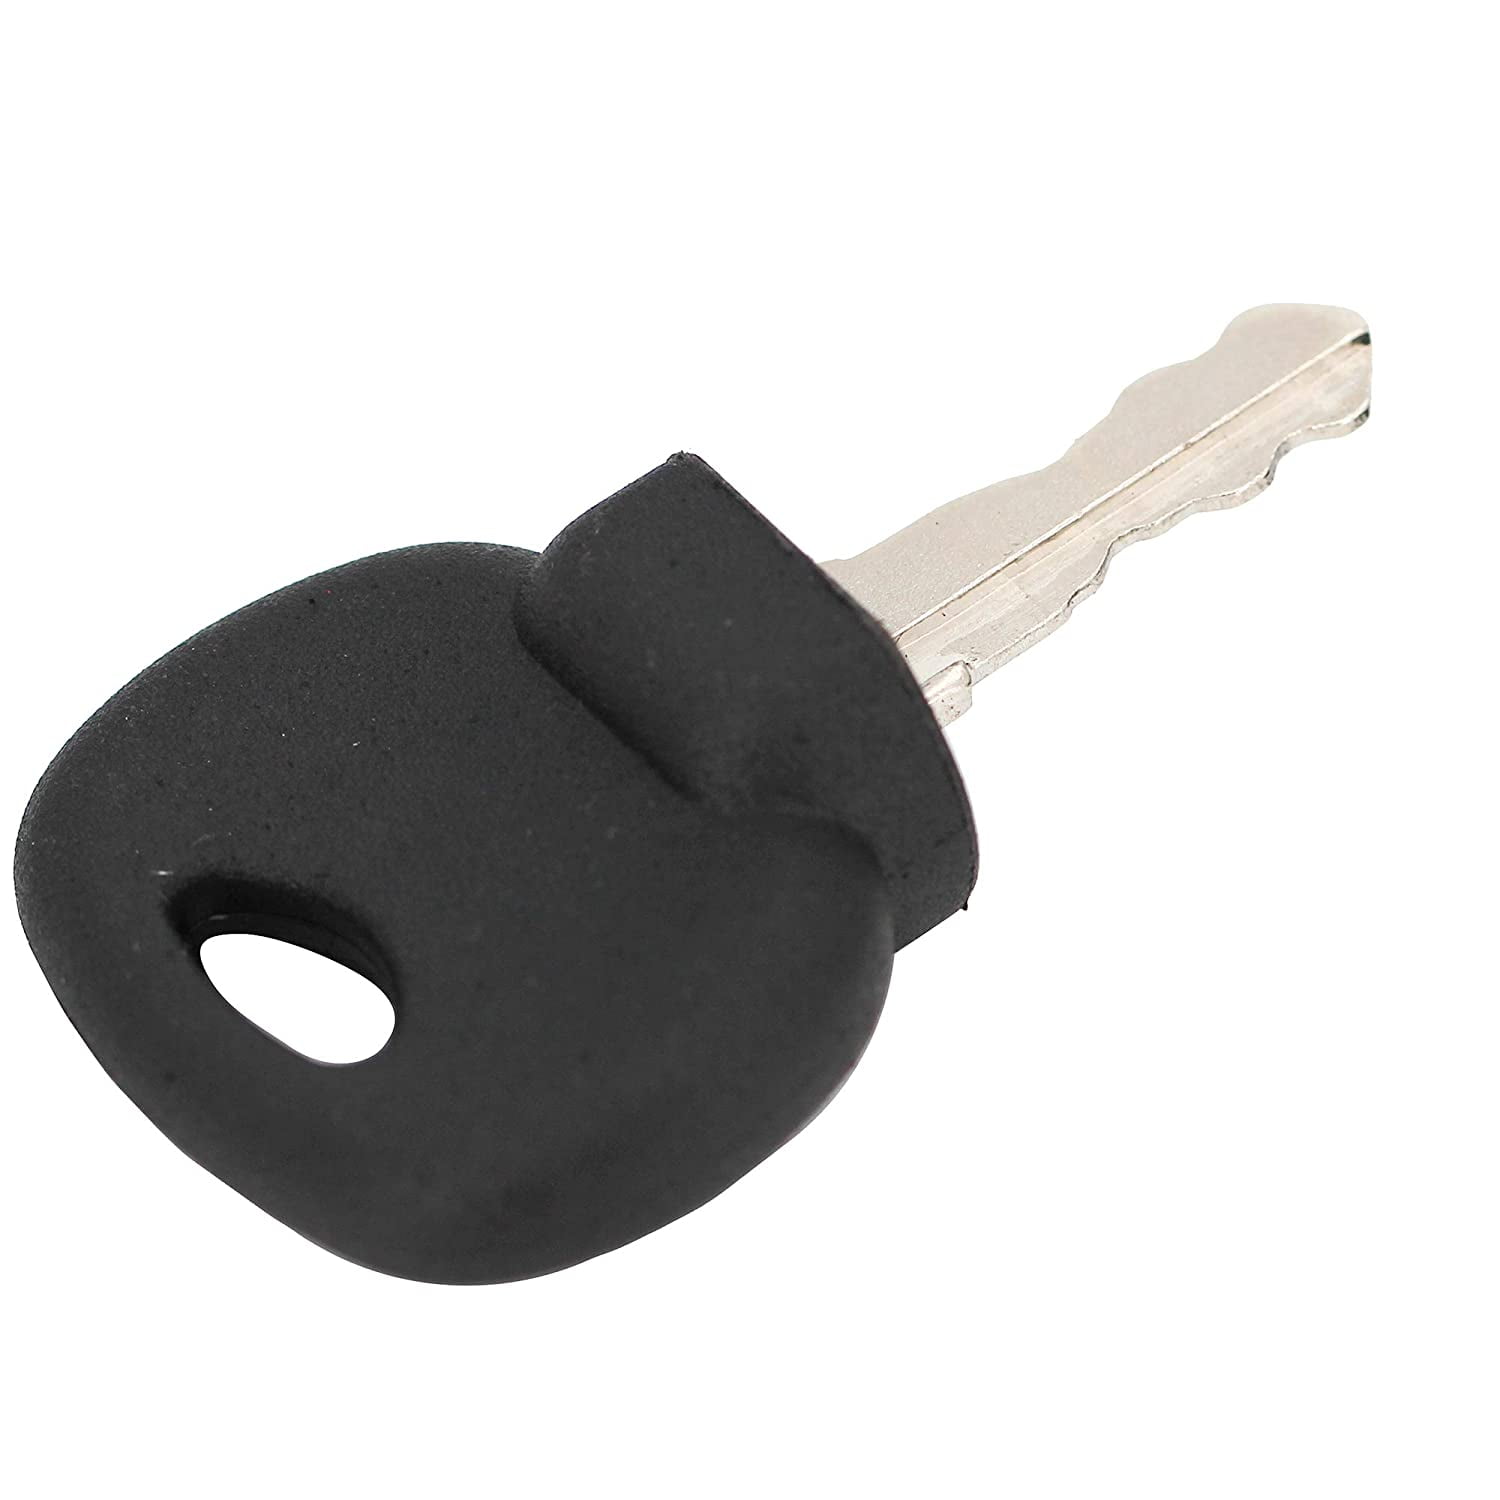 Notonmek 14707 Dust Skirt Key Made to fit Various Ford New Holland Industrial Models 